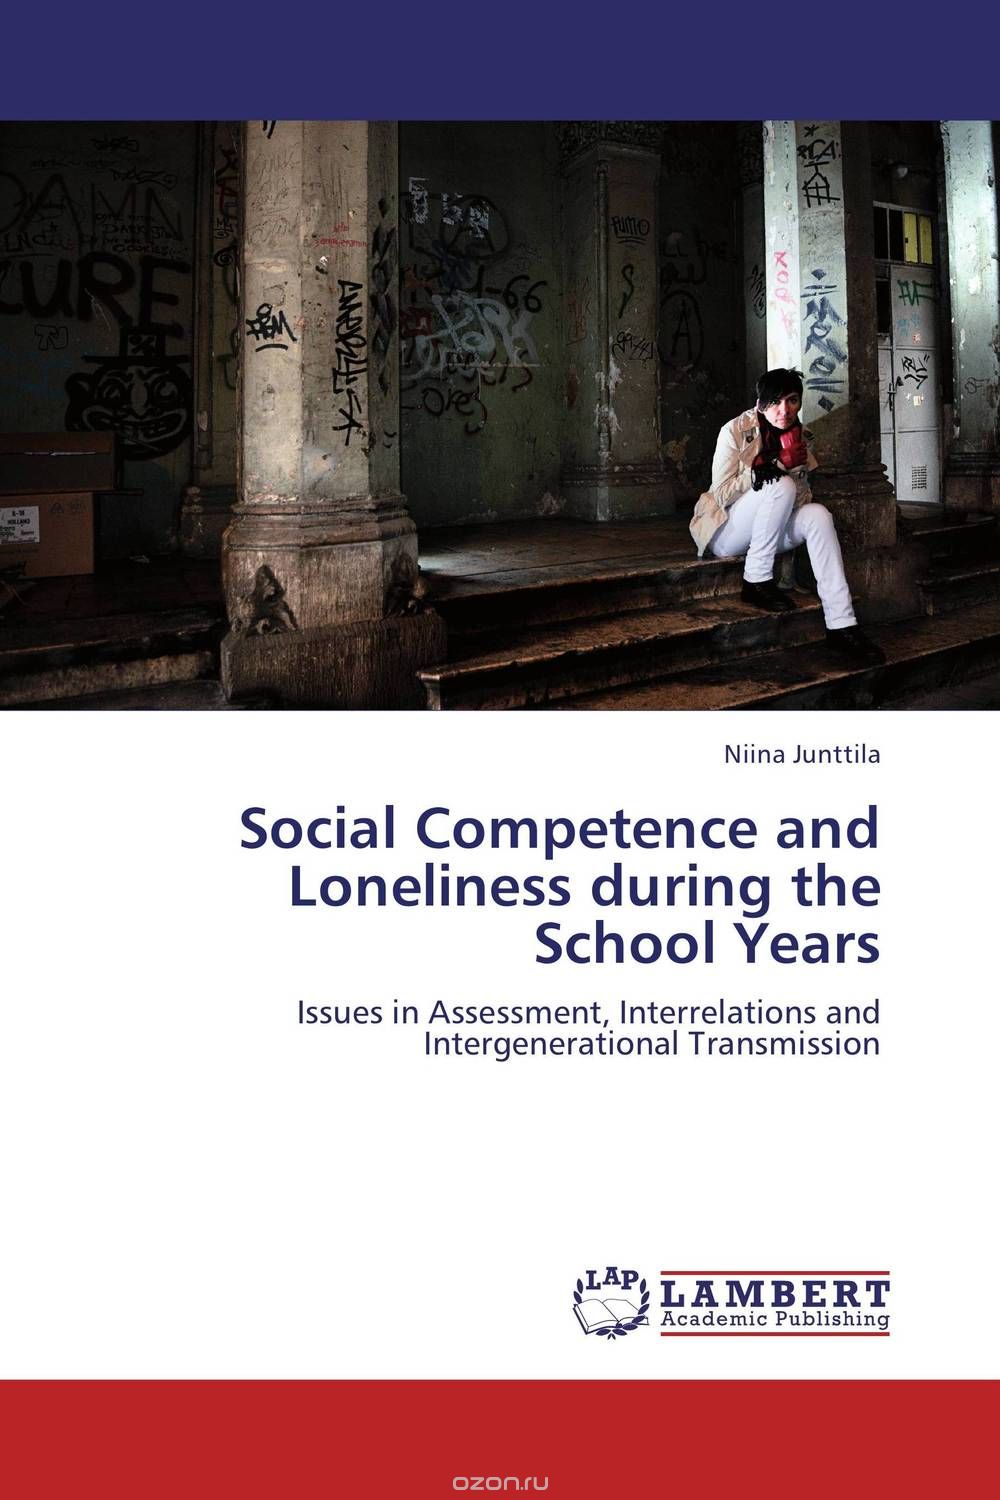 Social Competence and Loneliness during the School Years